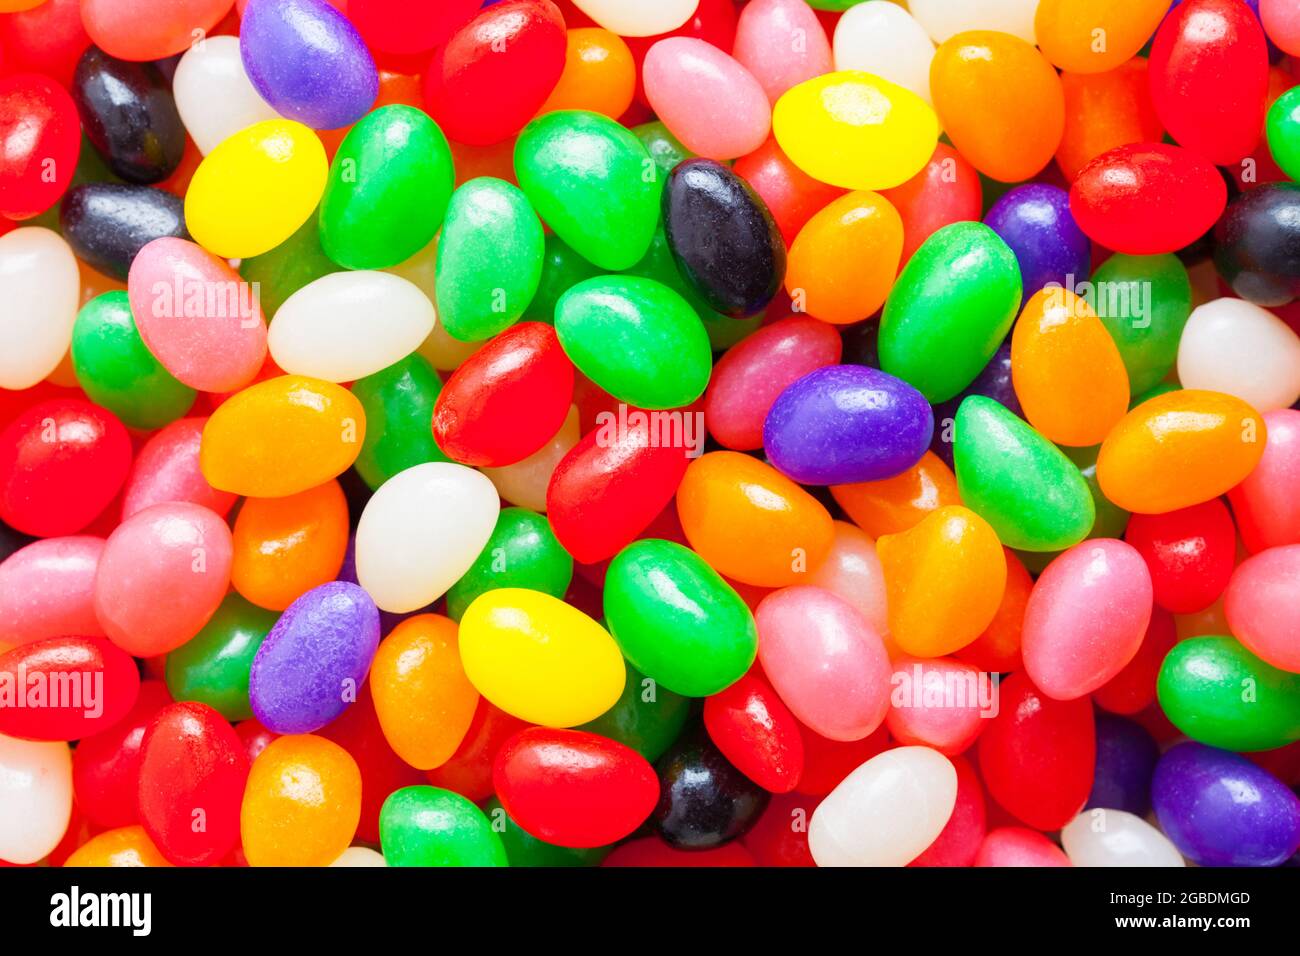 Colorful Pile of Jelly Beans Background Texture. Stock Photo